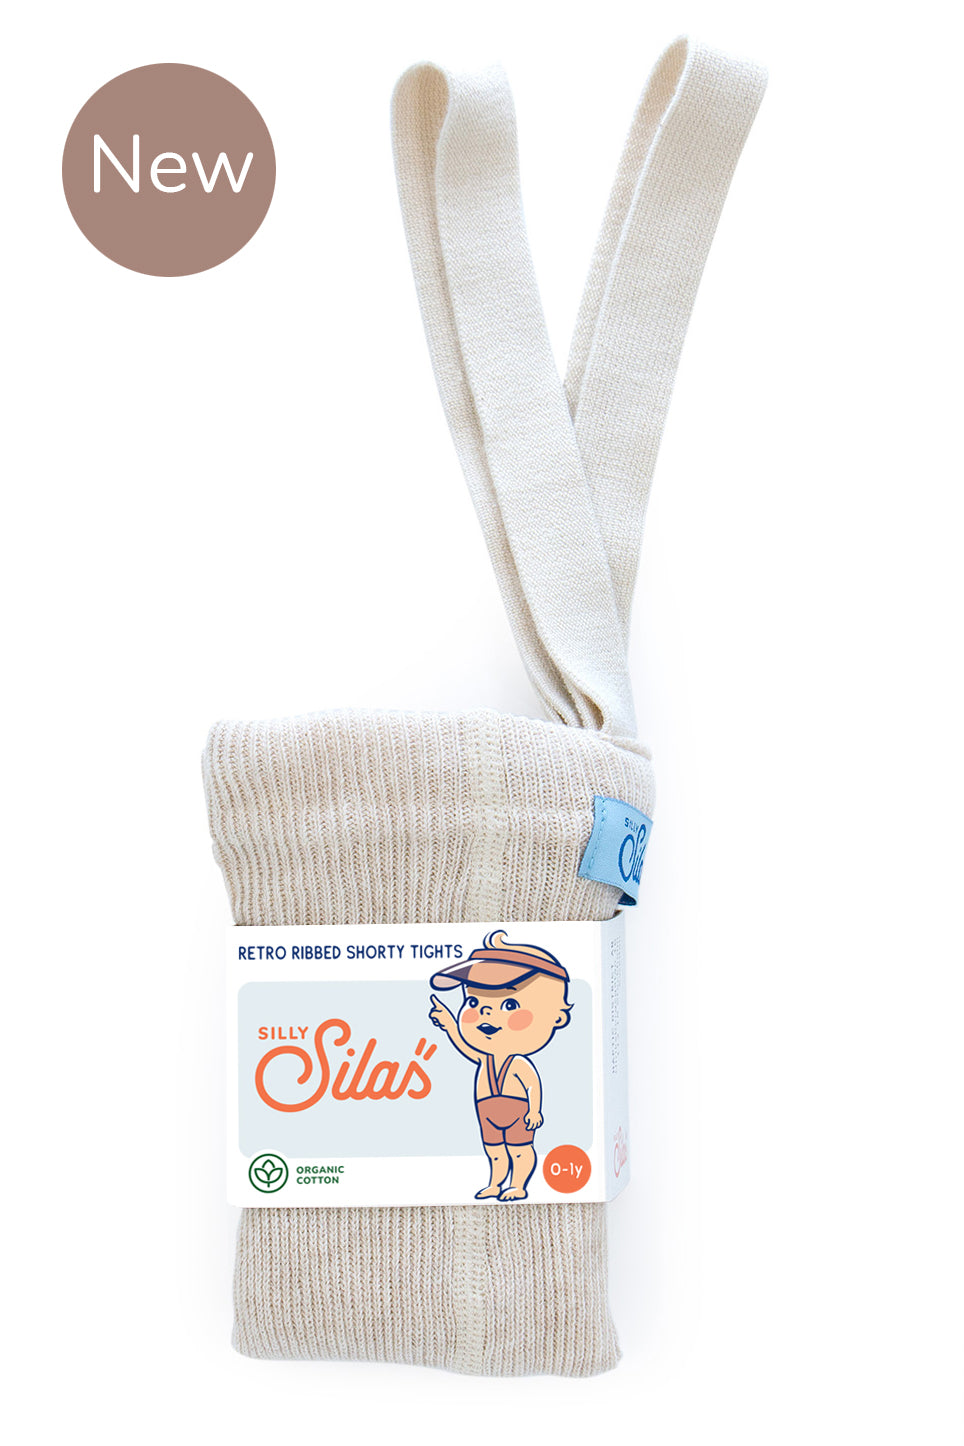 Silly Silas I Children's tights with braces I Offical online store